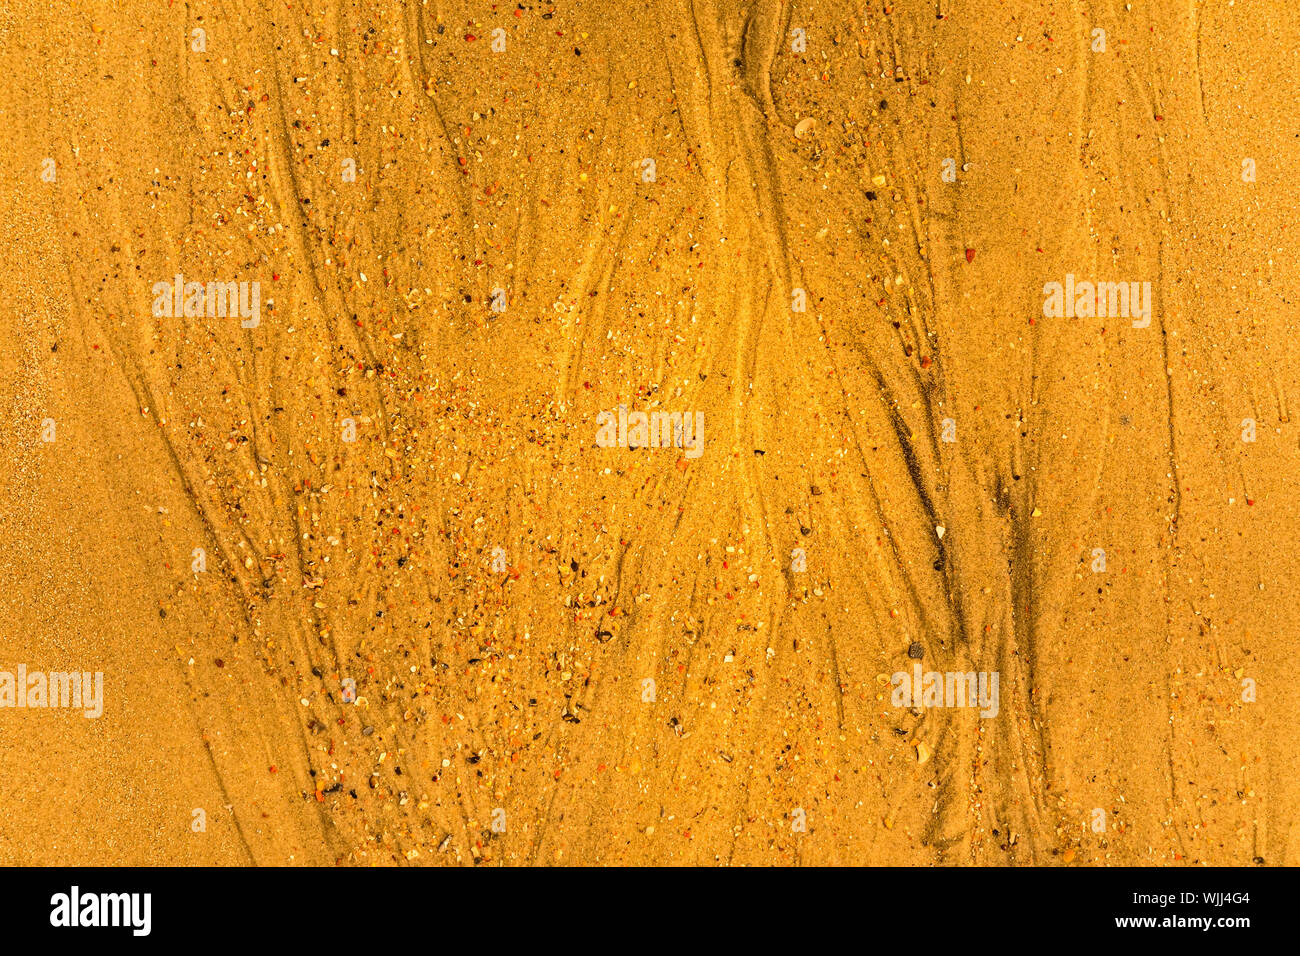 Close-up of sand with tidal ways and shells on the beach, full frame texture Stock Photo